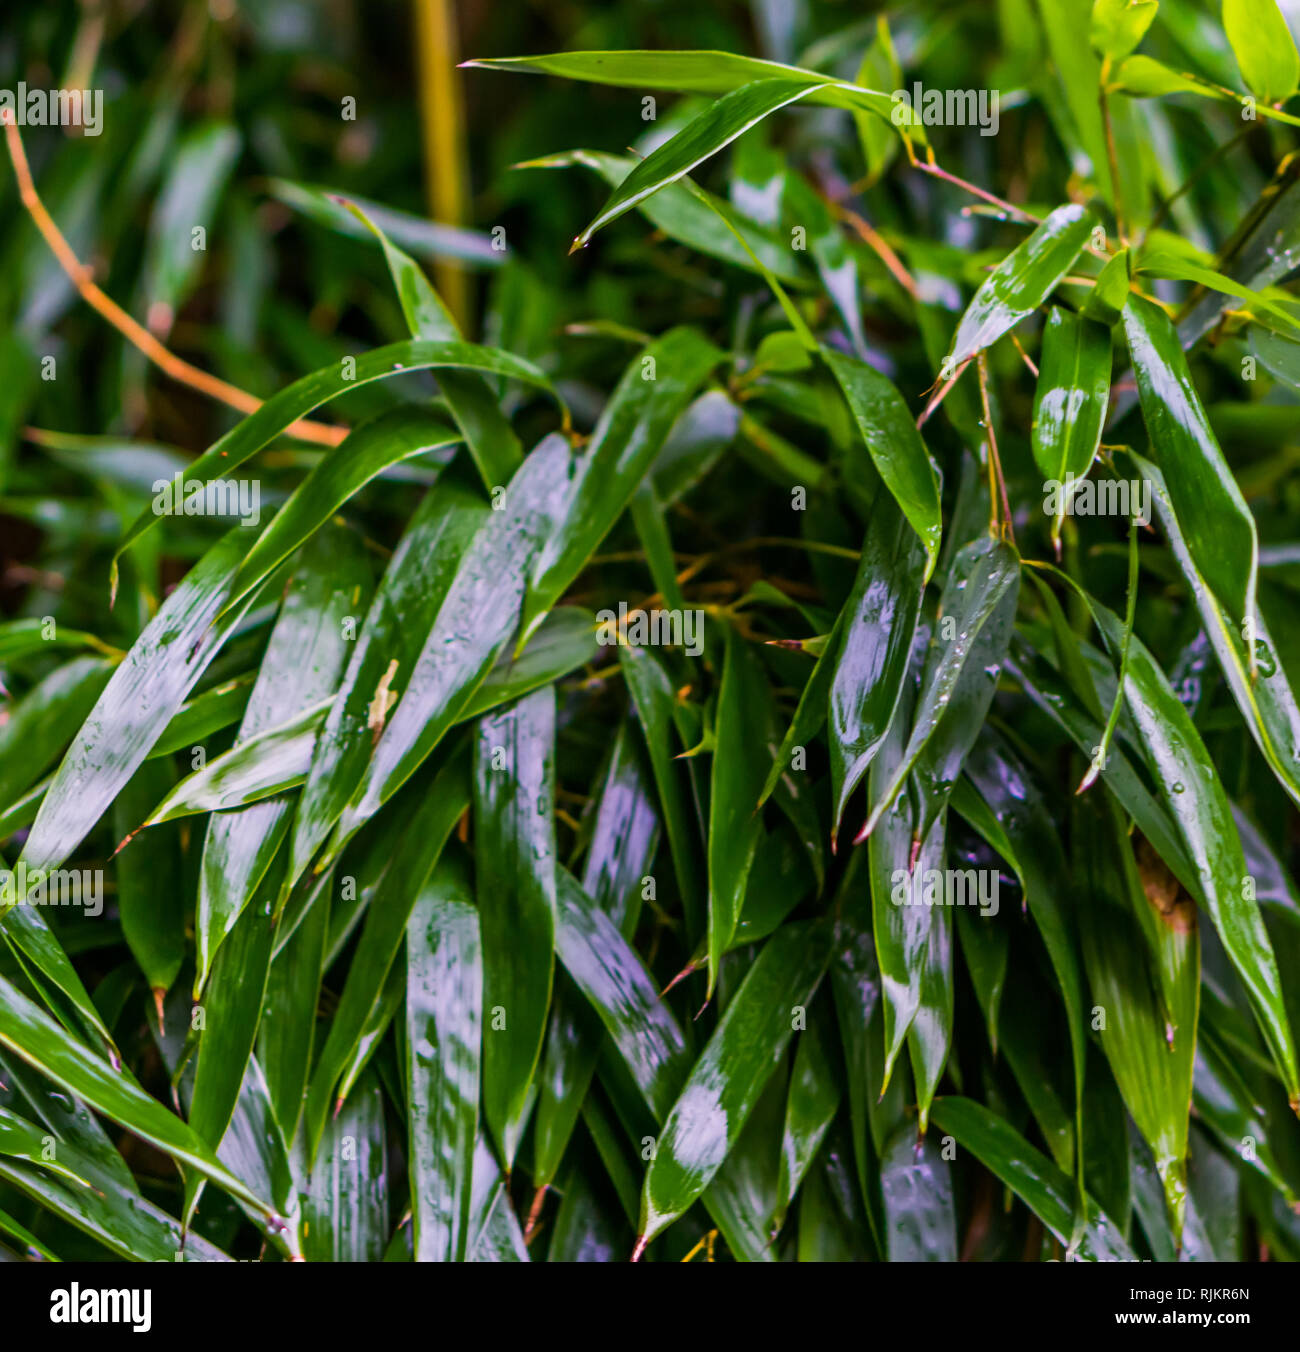 green wet bamboo leaves in macro closeup, natural background pattern, Chinese garden Stock Photo